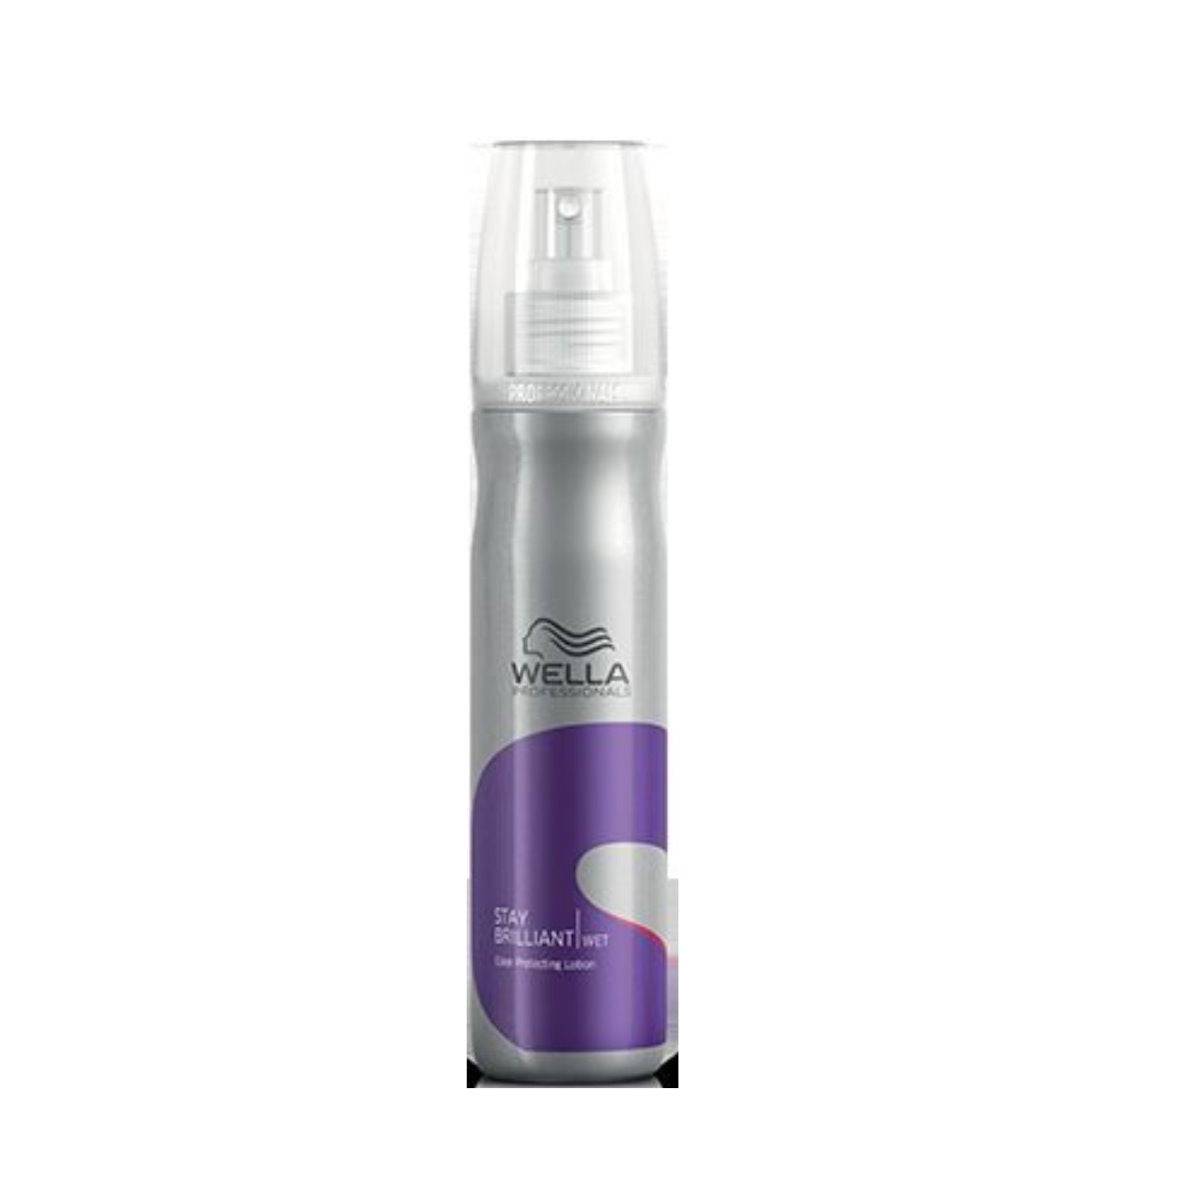 Wella Professionals Stay Brilliant Colour Protecting Lotion 150ml - On Line Hair Depot